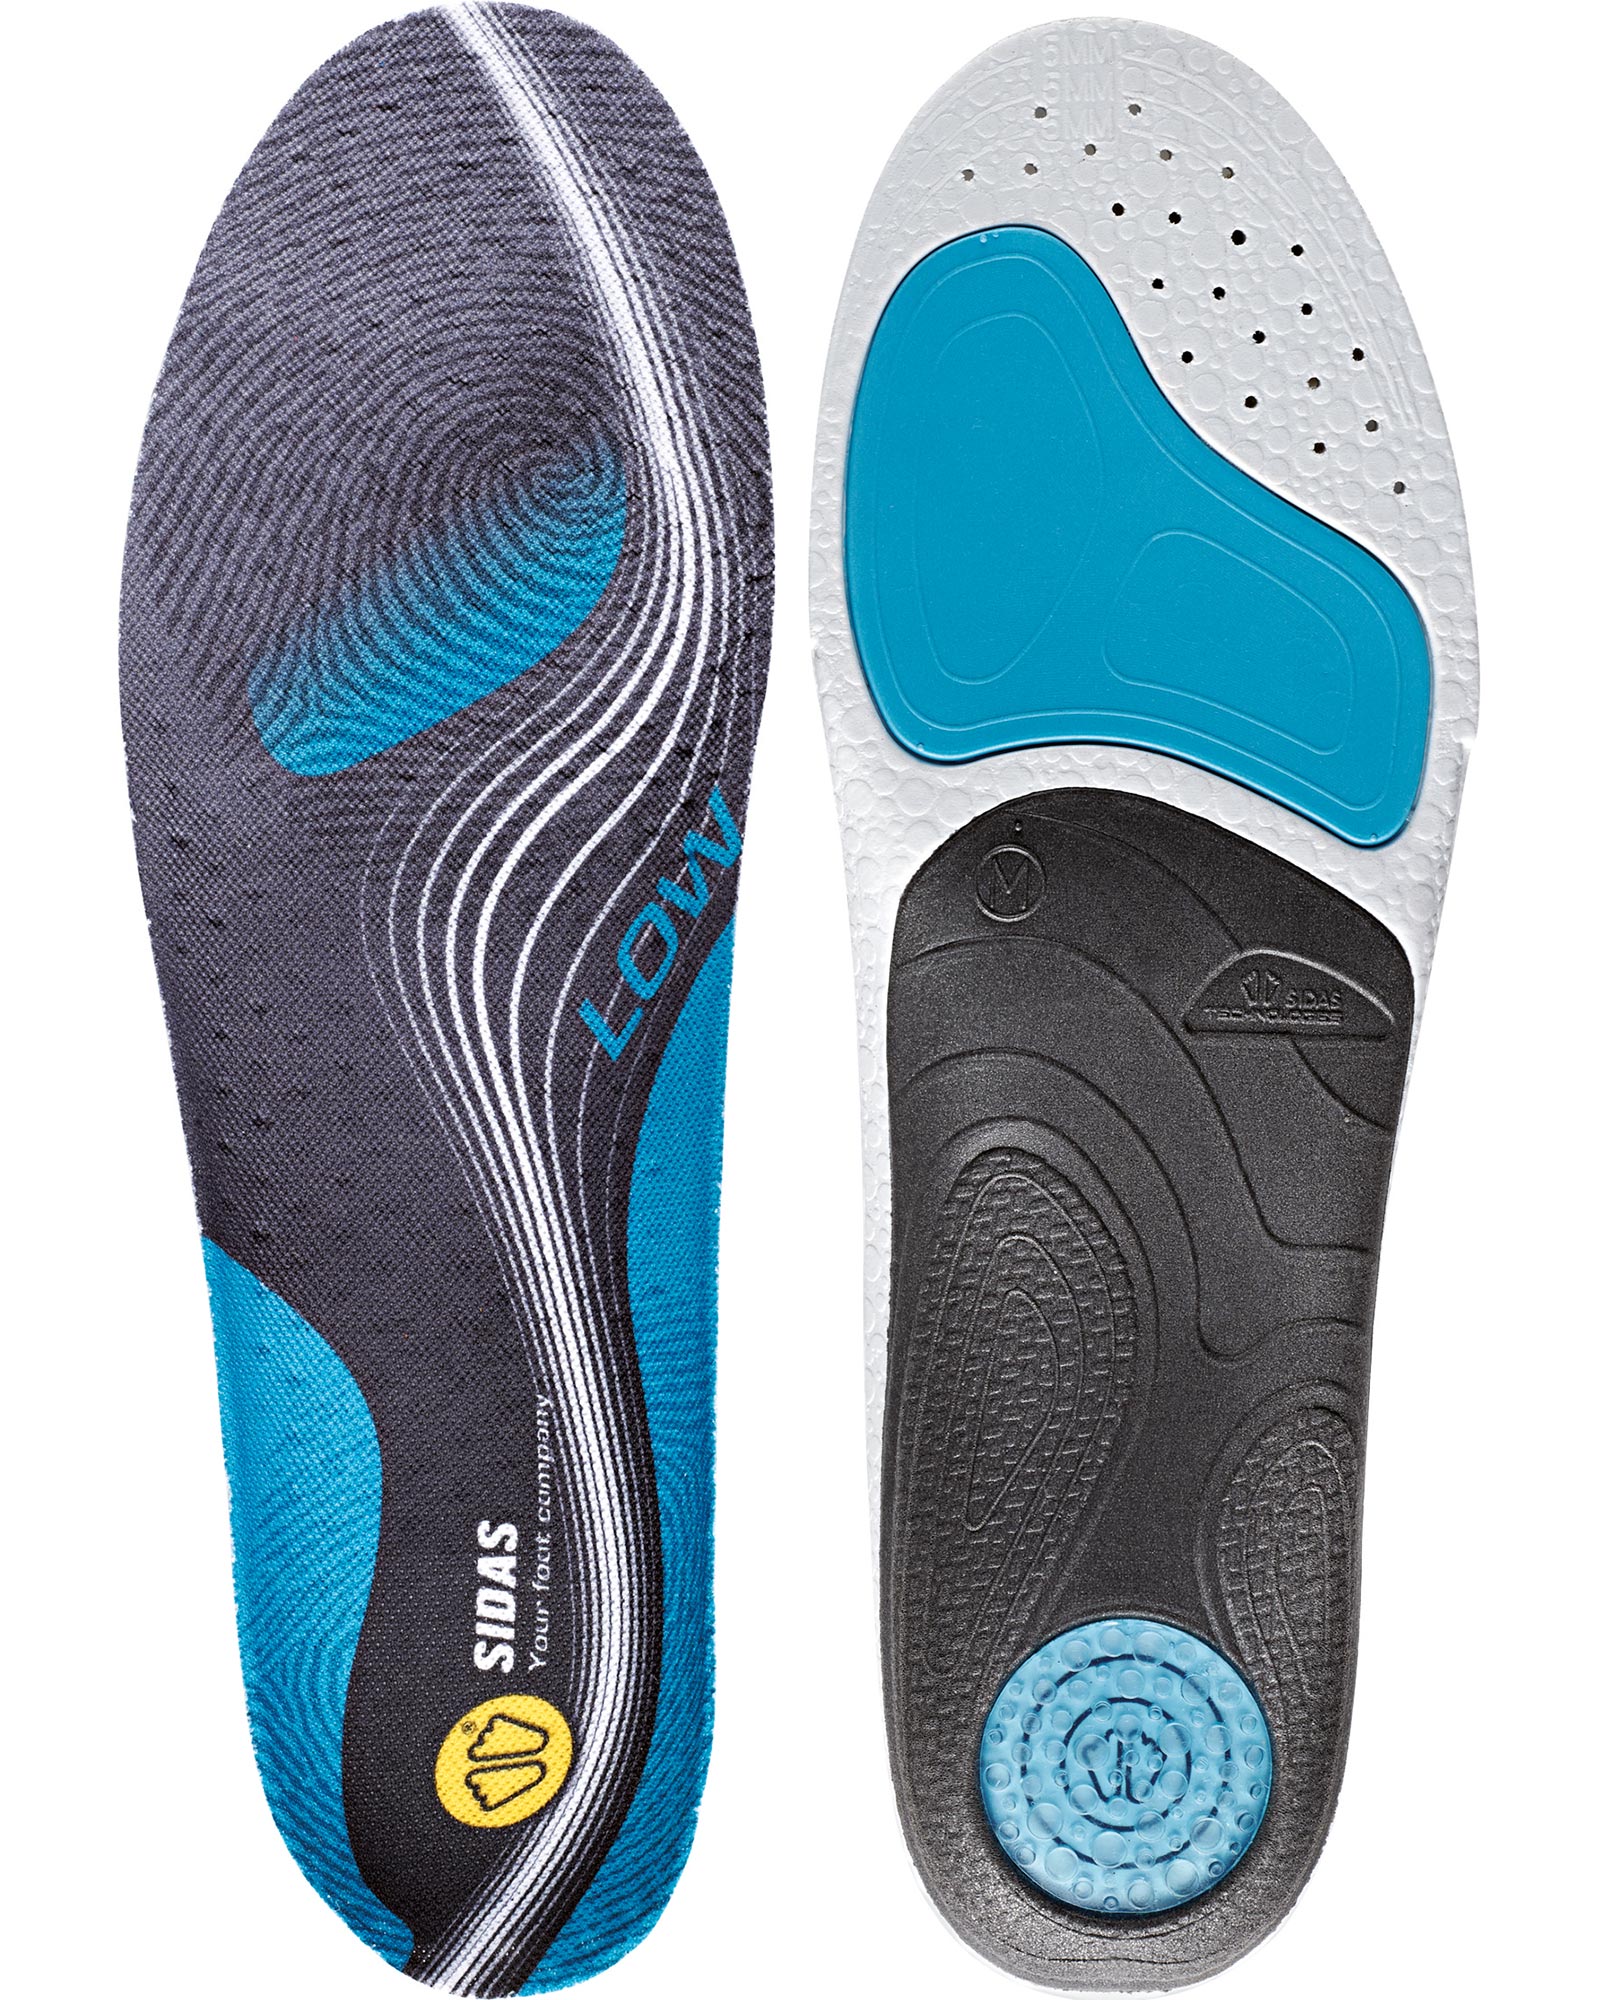 Sidas 3Feet Activ’ Low Insoles S